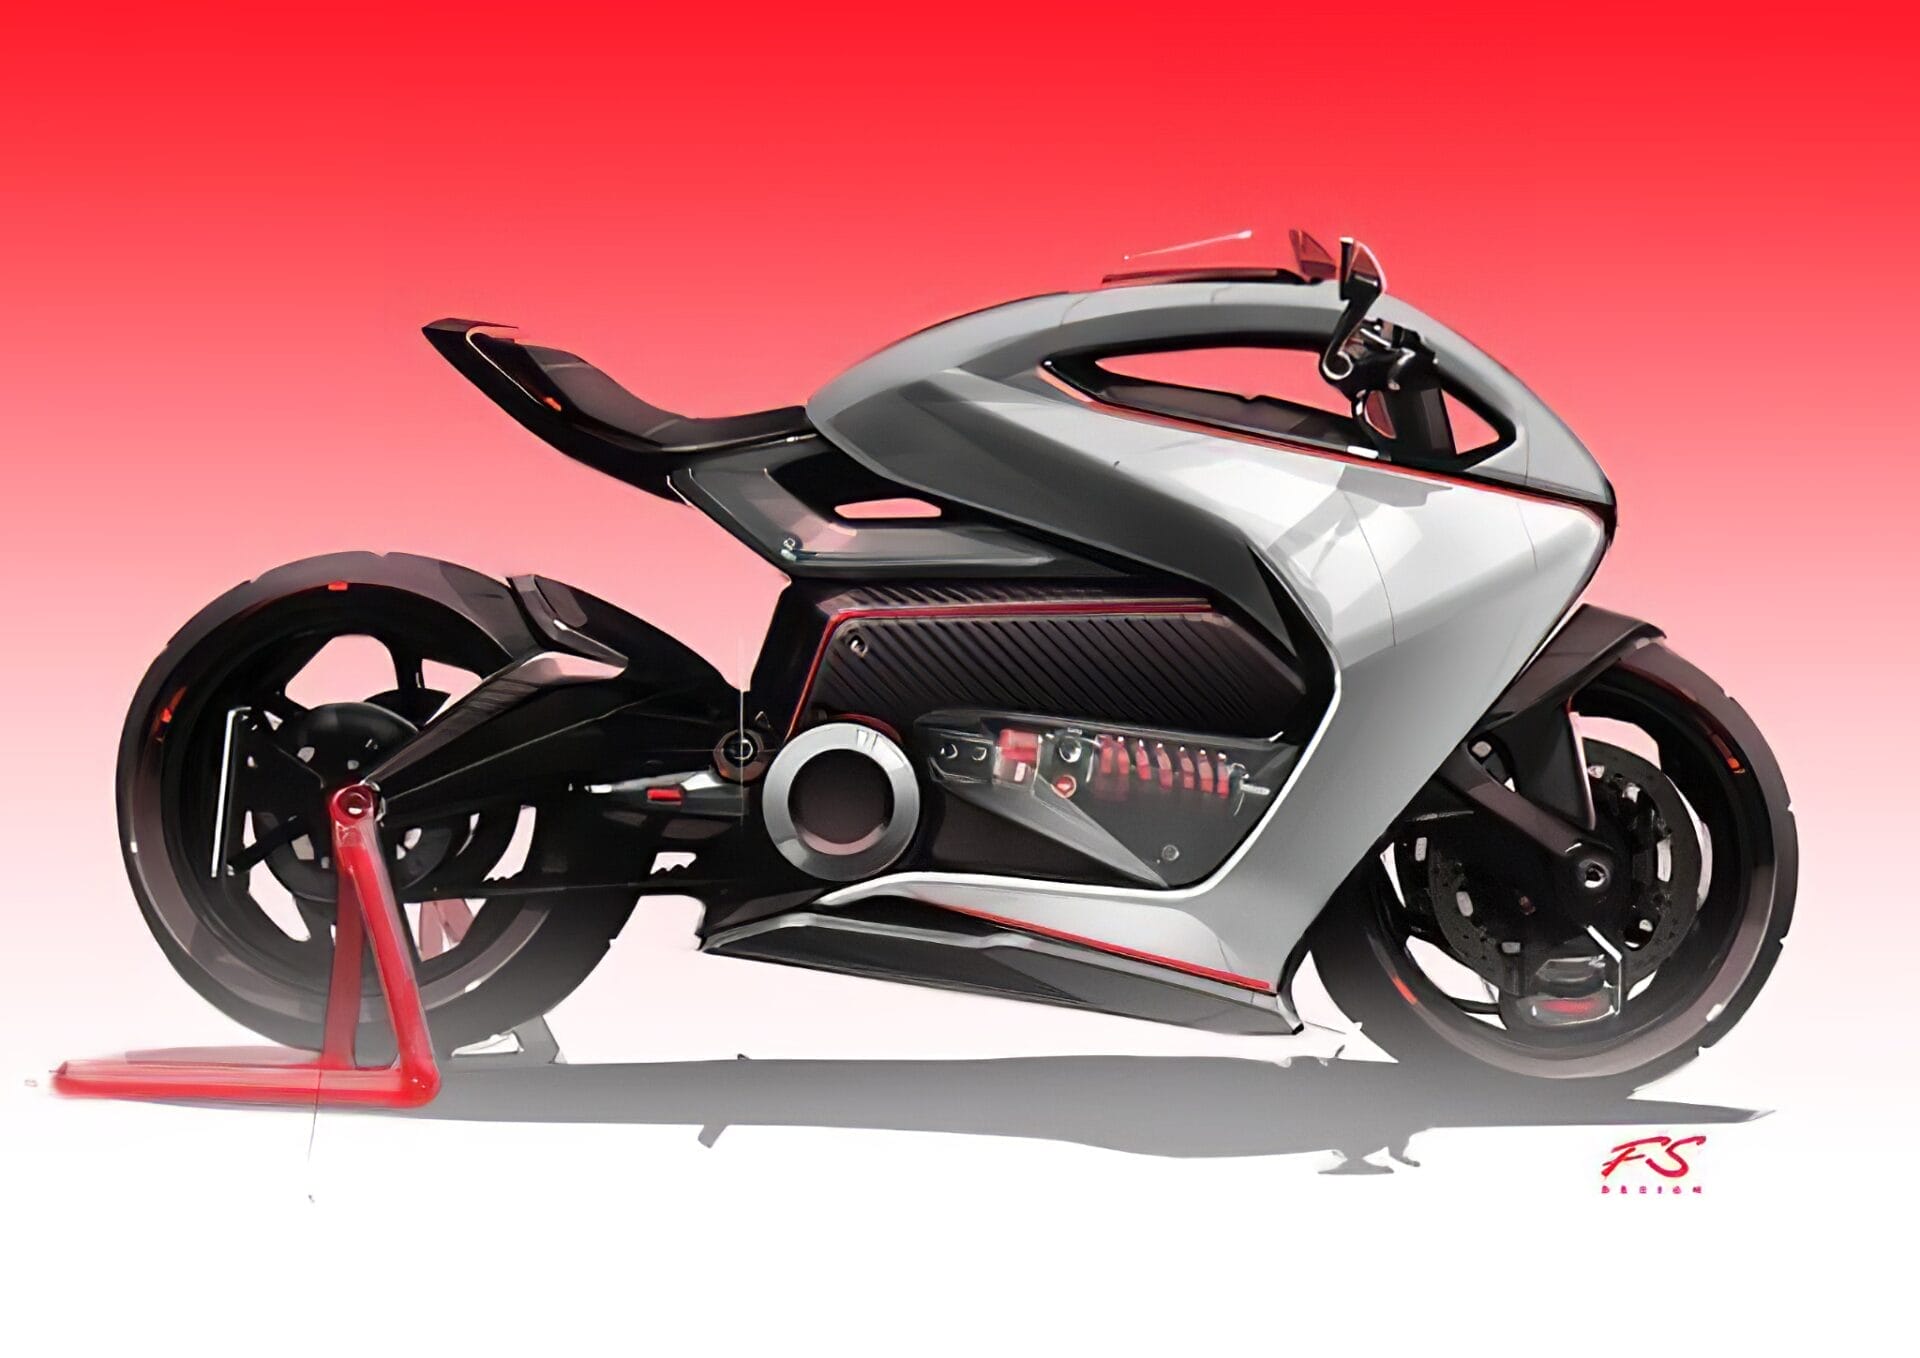 The FSD 59 motorcycle concept: a new era in two-wheel technology